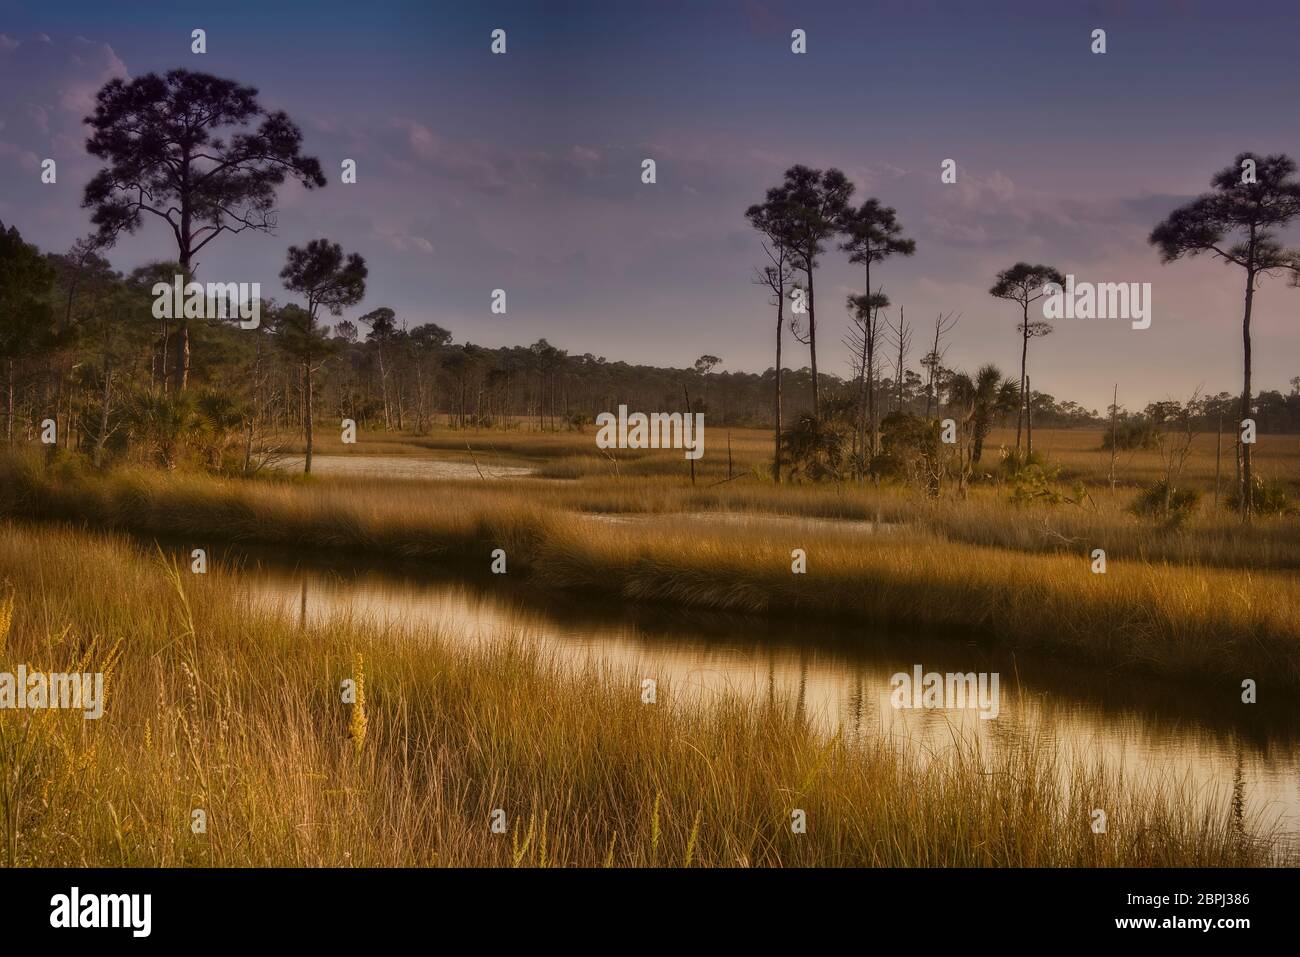 Marshland and swampy area of Northern Florida near the St. Marks river in Tallahassee, Florida. Stock Photo